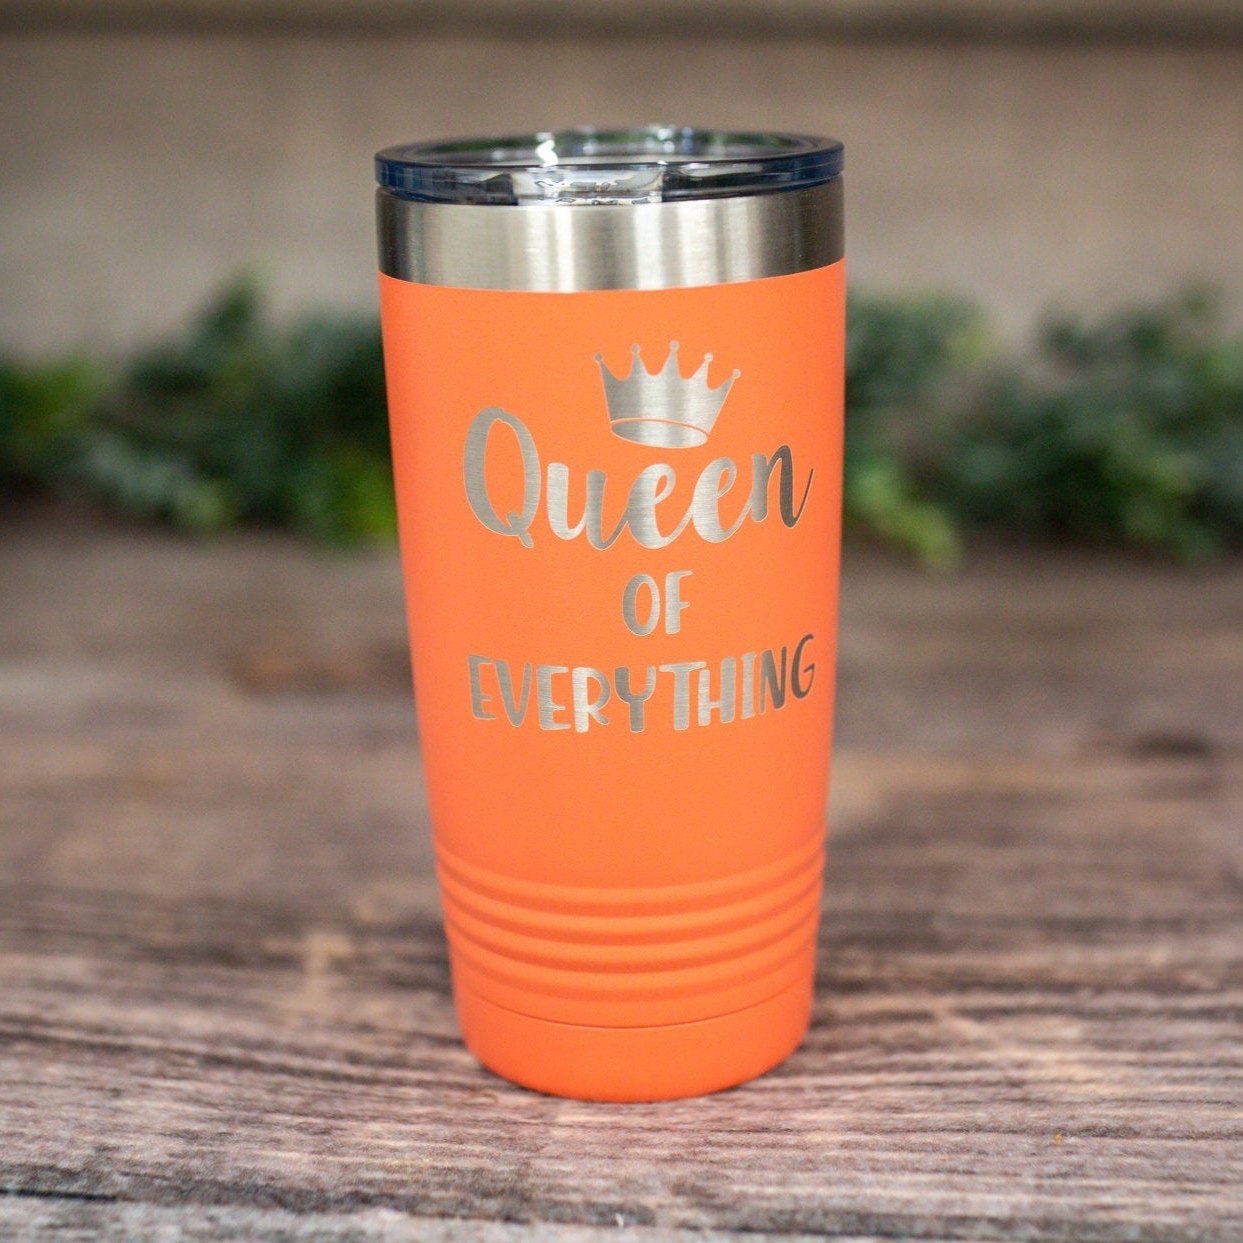 https://3cetching.com/wp-content/uploads/2021/07/queen-of-everything-engraved-tumbler-personalized-travel-mug-motivational-mug-for-her-60f77ba0.jpg